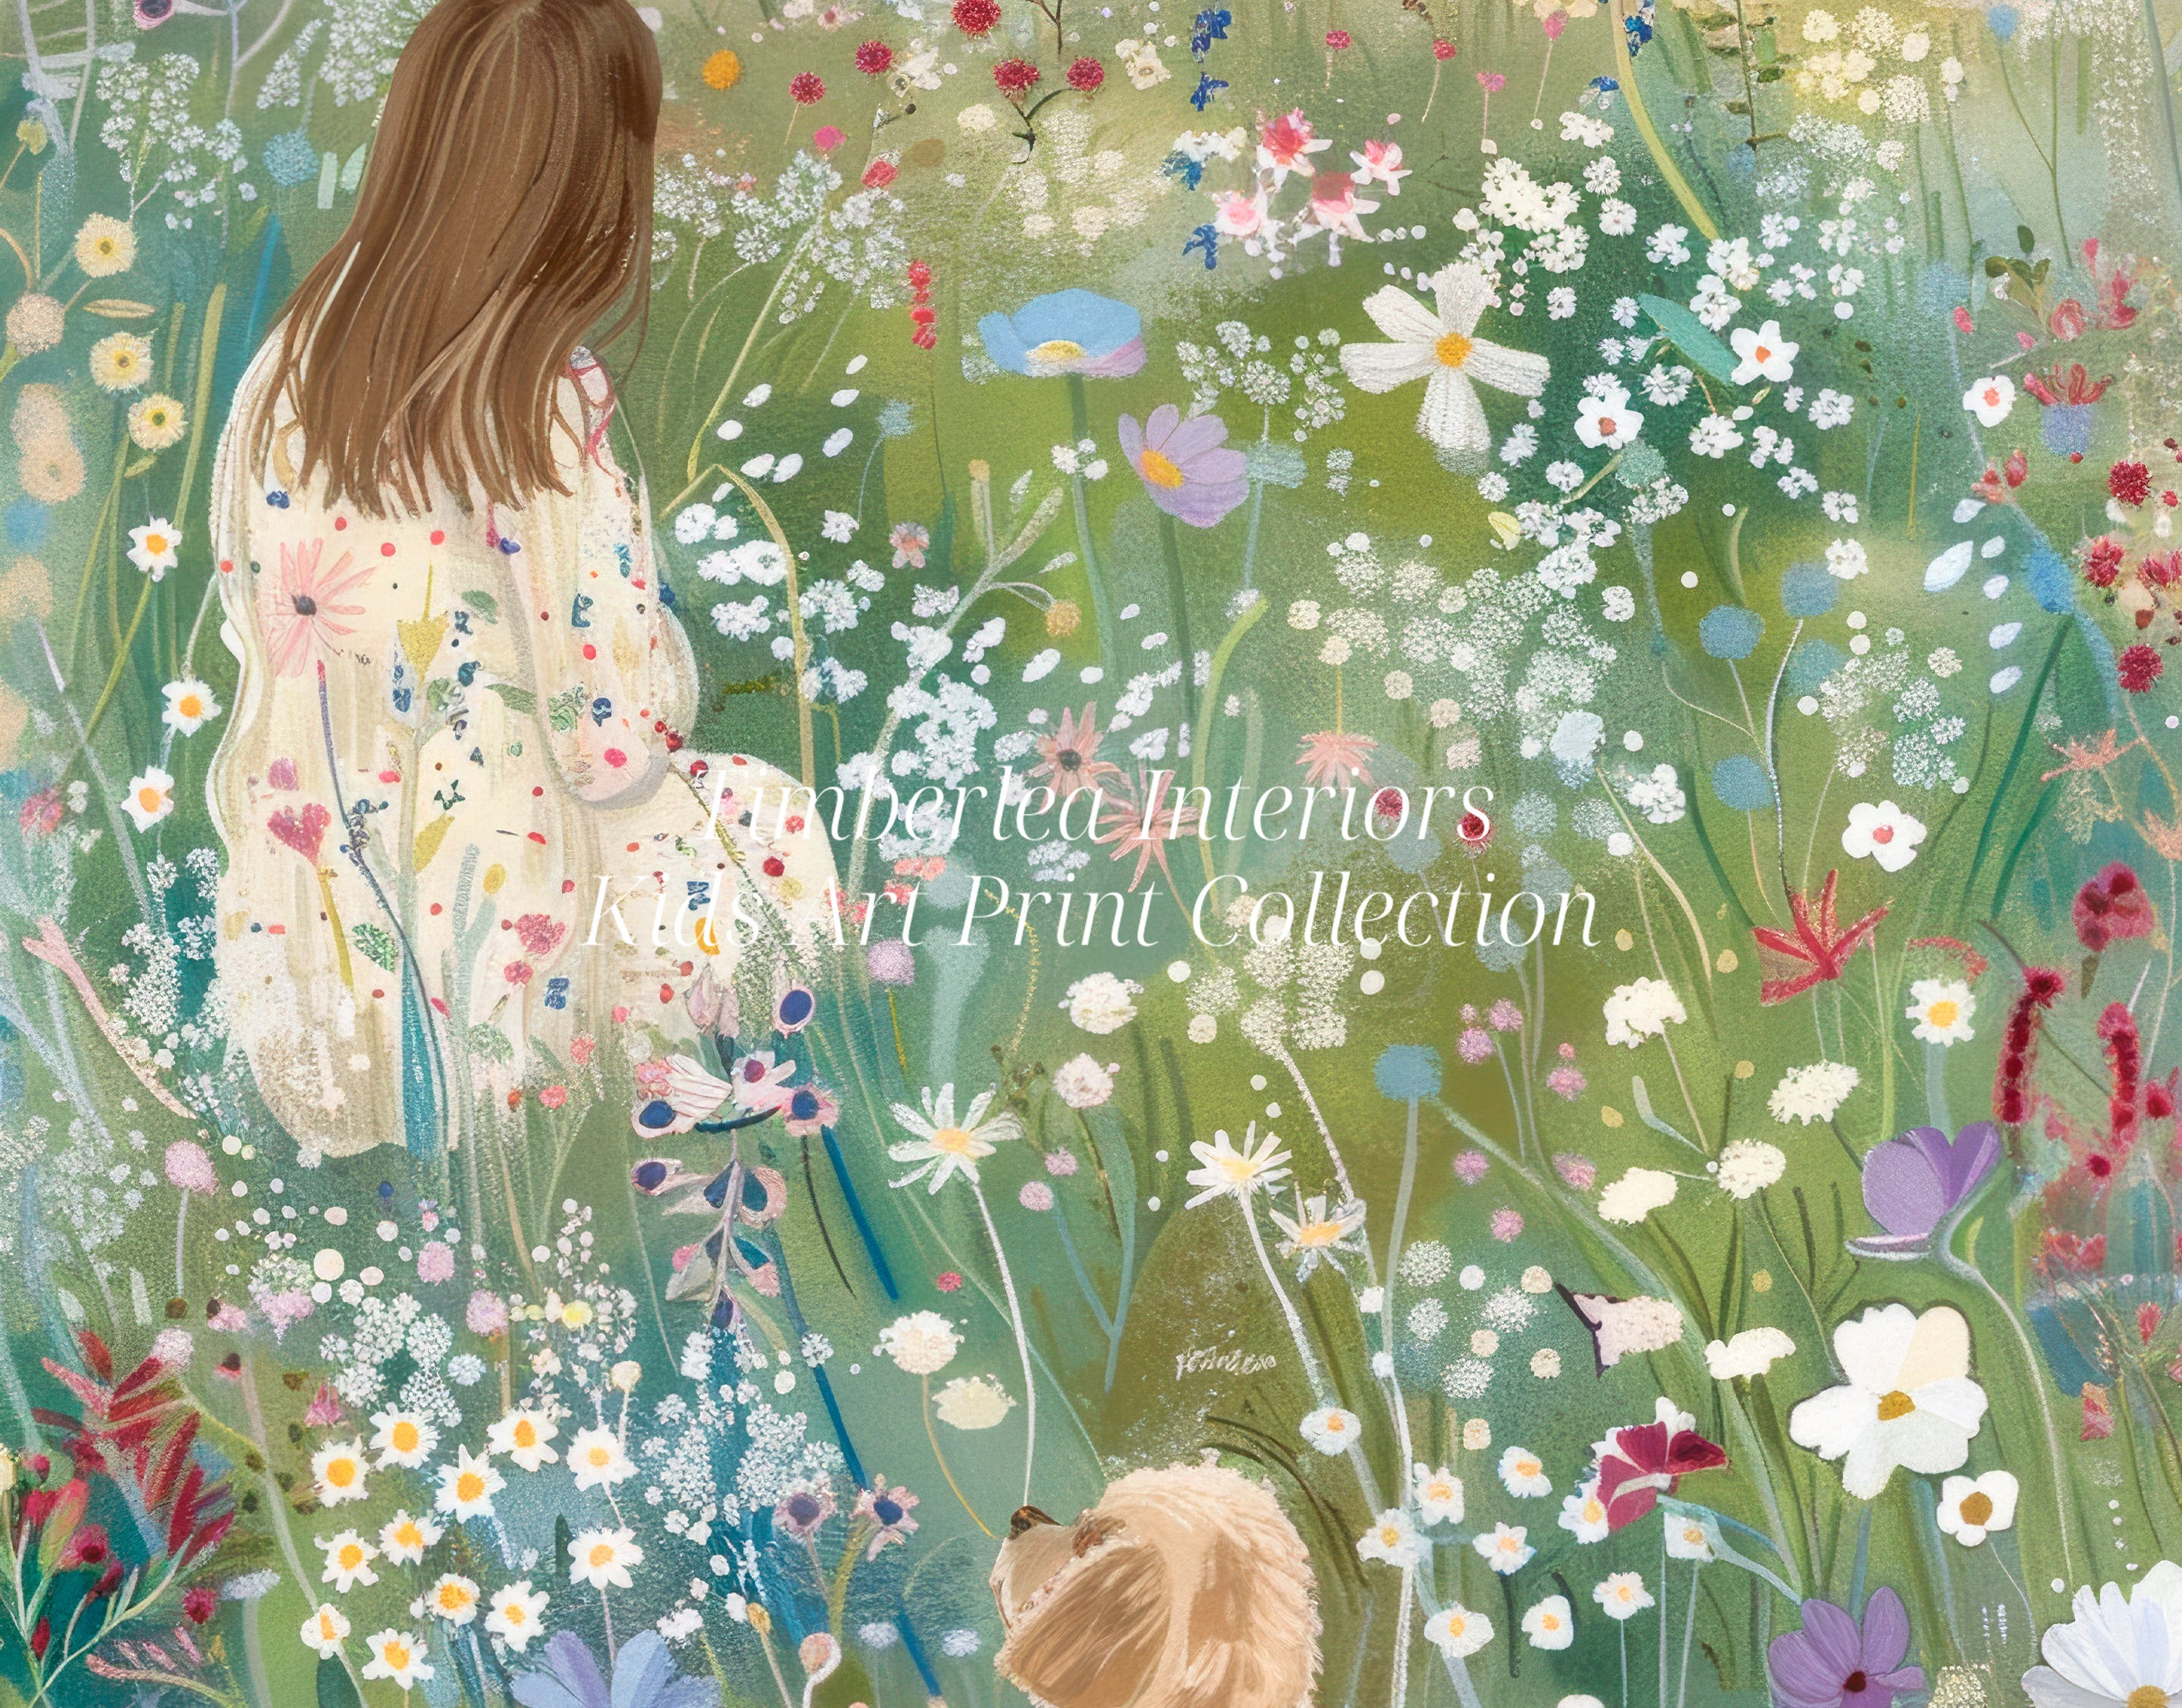 A detailed close-up of the "Field of Dreams" art print, showcasing a girl in a pastel dress and her dog sitting in a meadow filled with vibrant wildflowers.